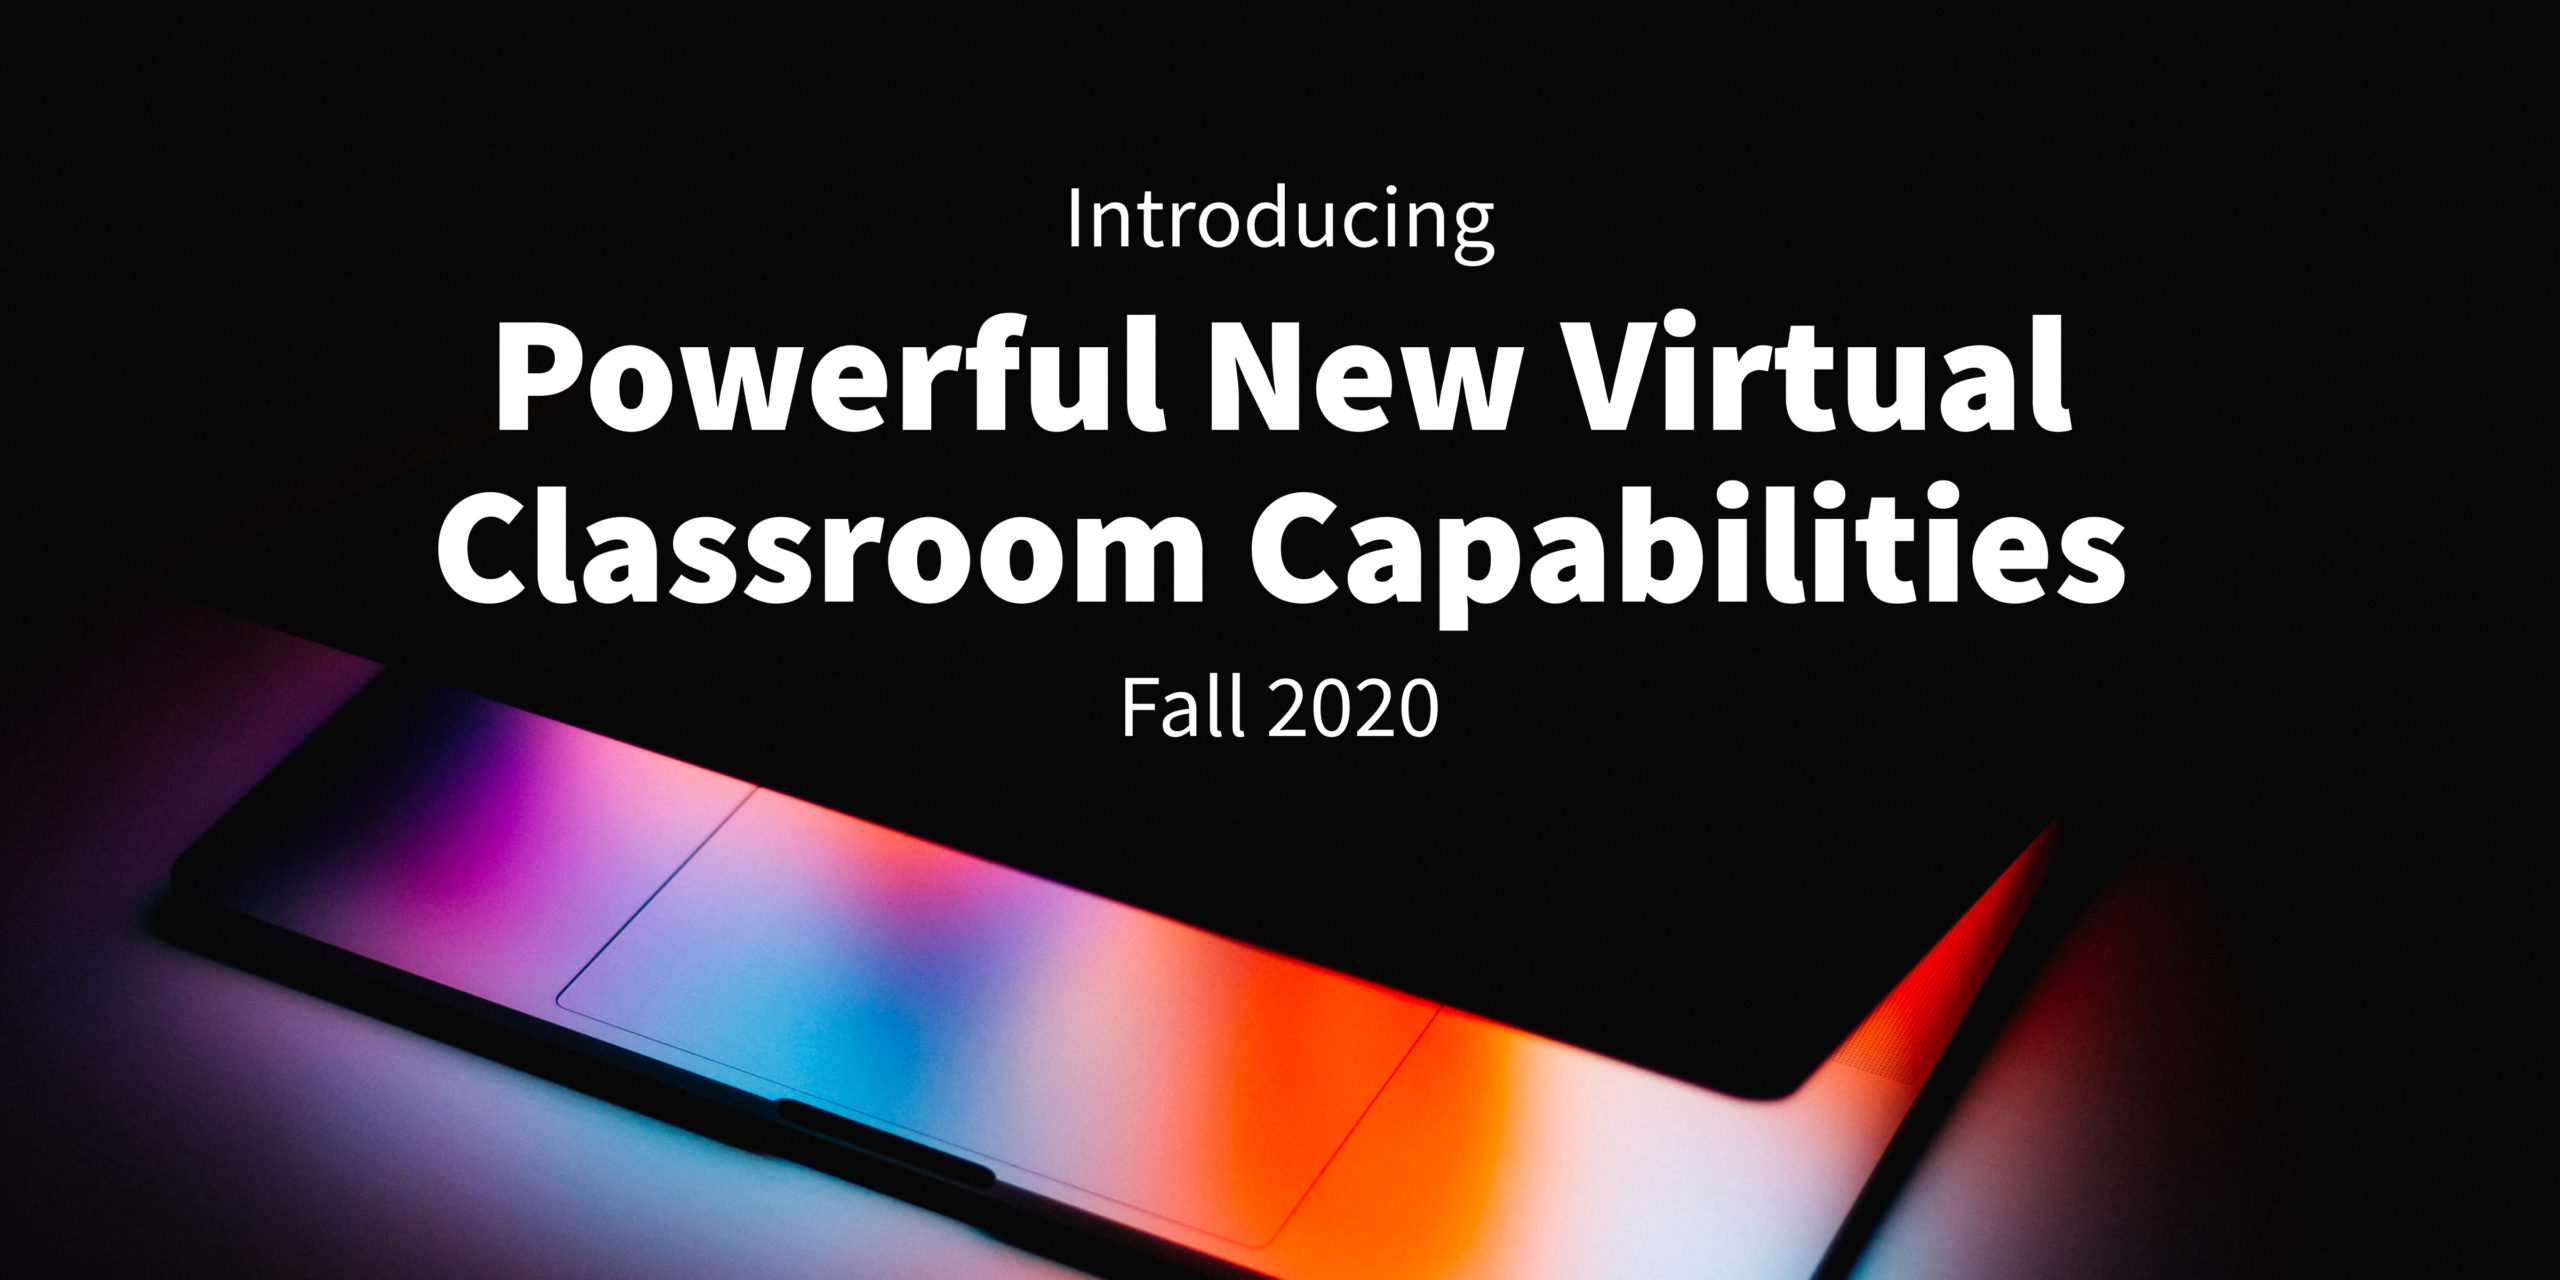 We’re Launching Powerful Virtual Classroom Capabilities and a New Free Offering